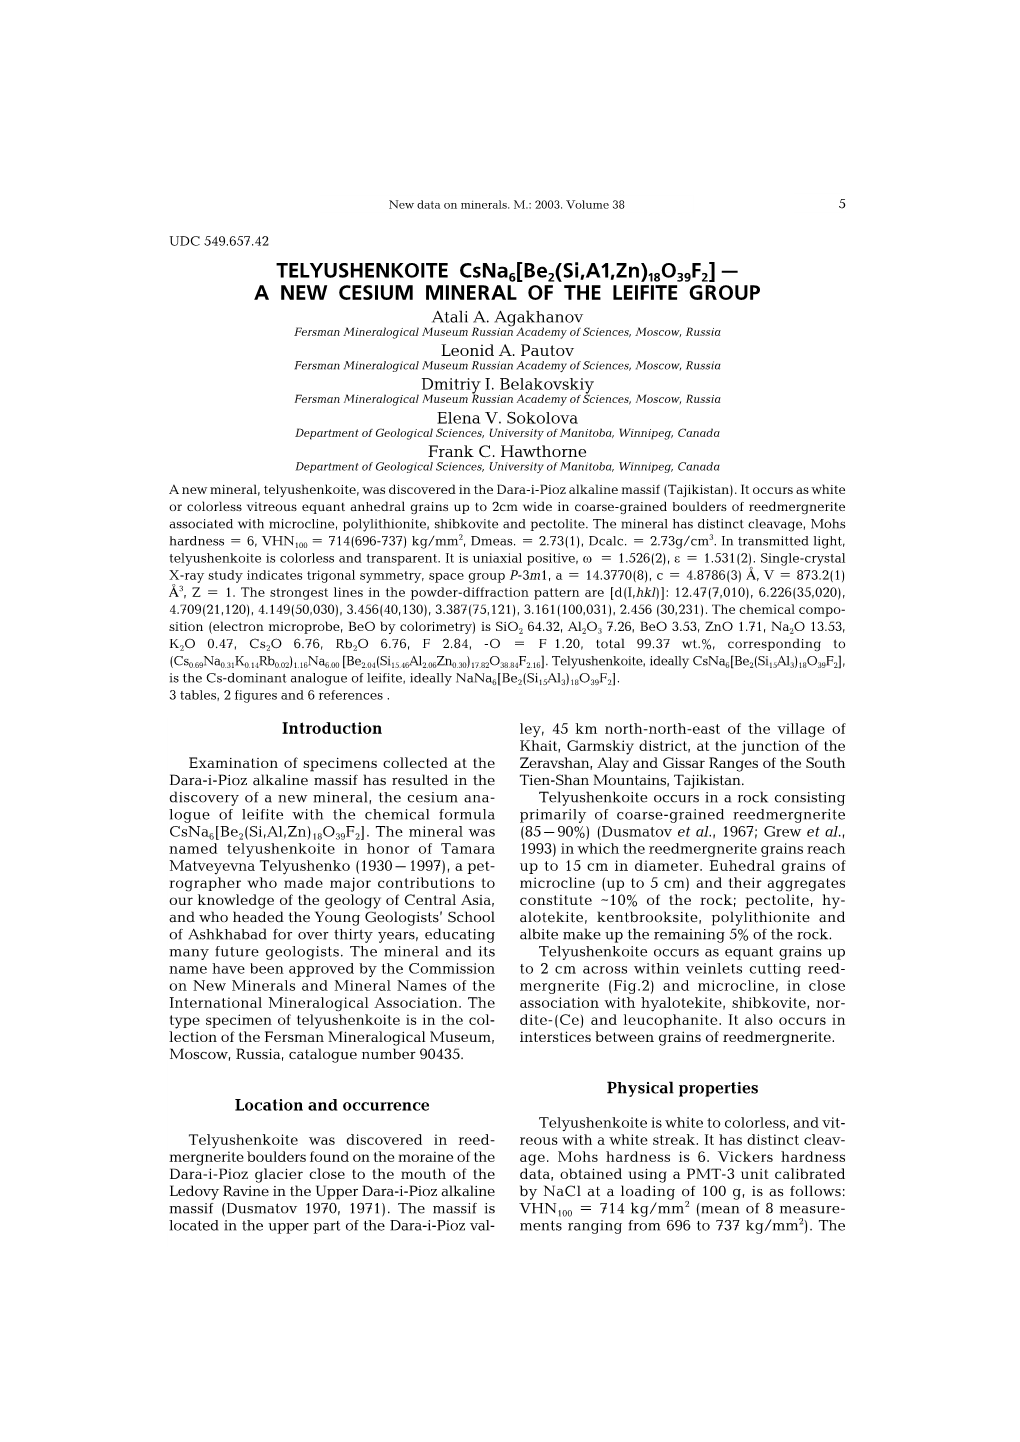 TELYUSHENKOITE Csna6[Be2(Si,A1,Zn)18O39F2] — a NEW CESIUM MINERAL of the LEIFITE GROUP Atali A